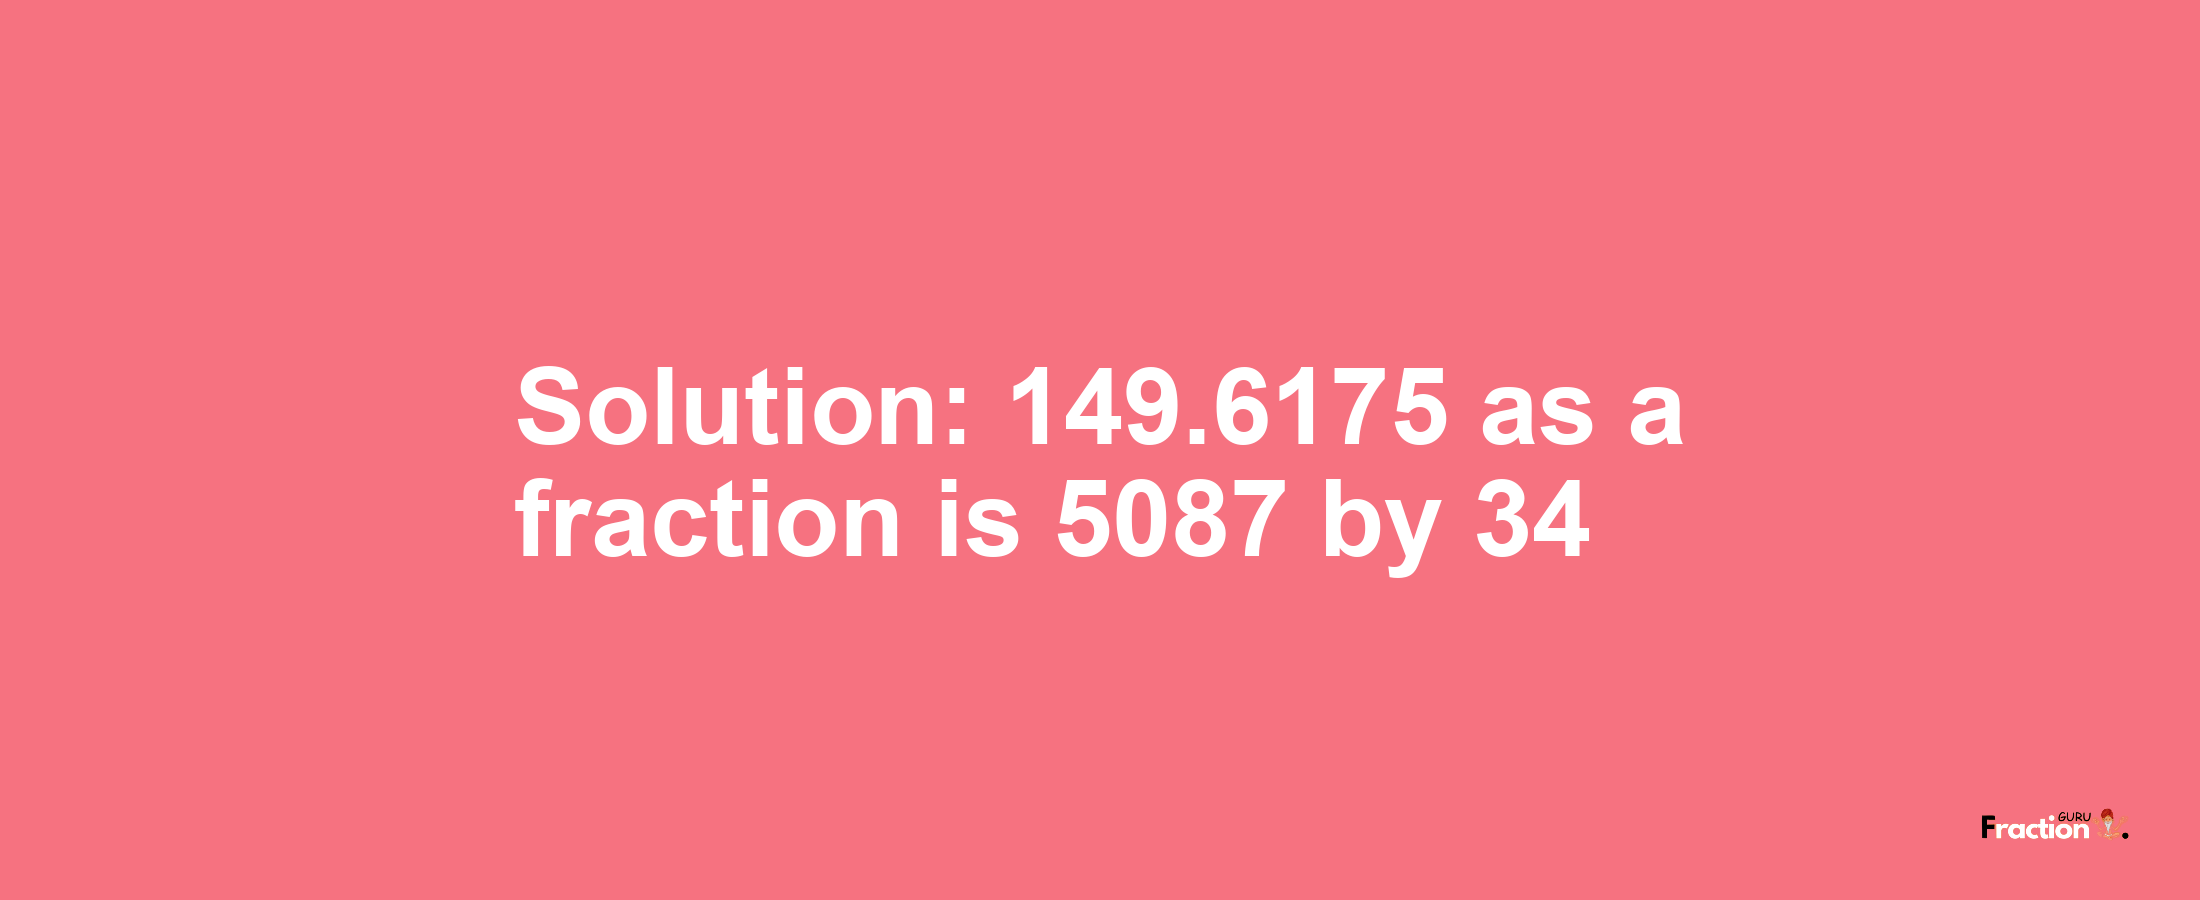 Solution:149.6175 as a fraction is 5087/34